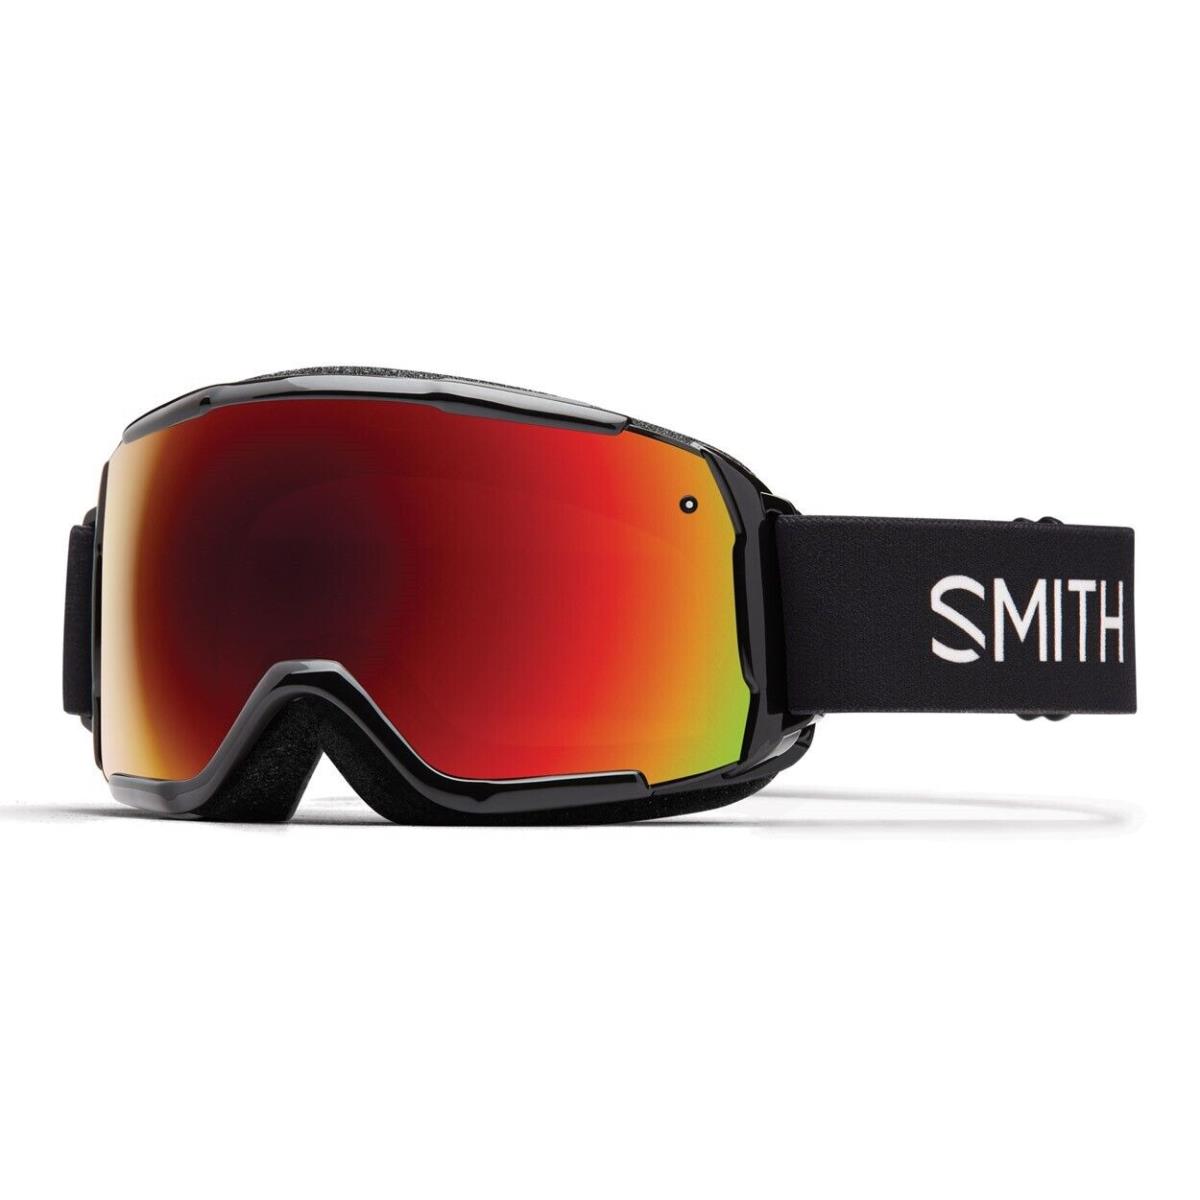 Smith Grom Youth Snow Goggles Black Frame Red Sol-x Mirror Lens